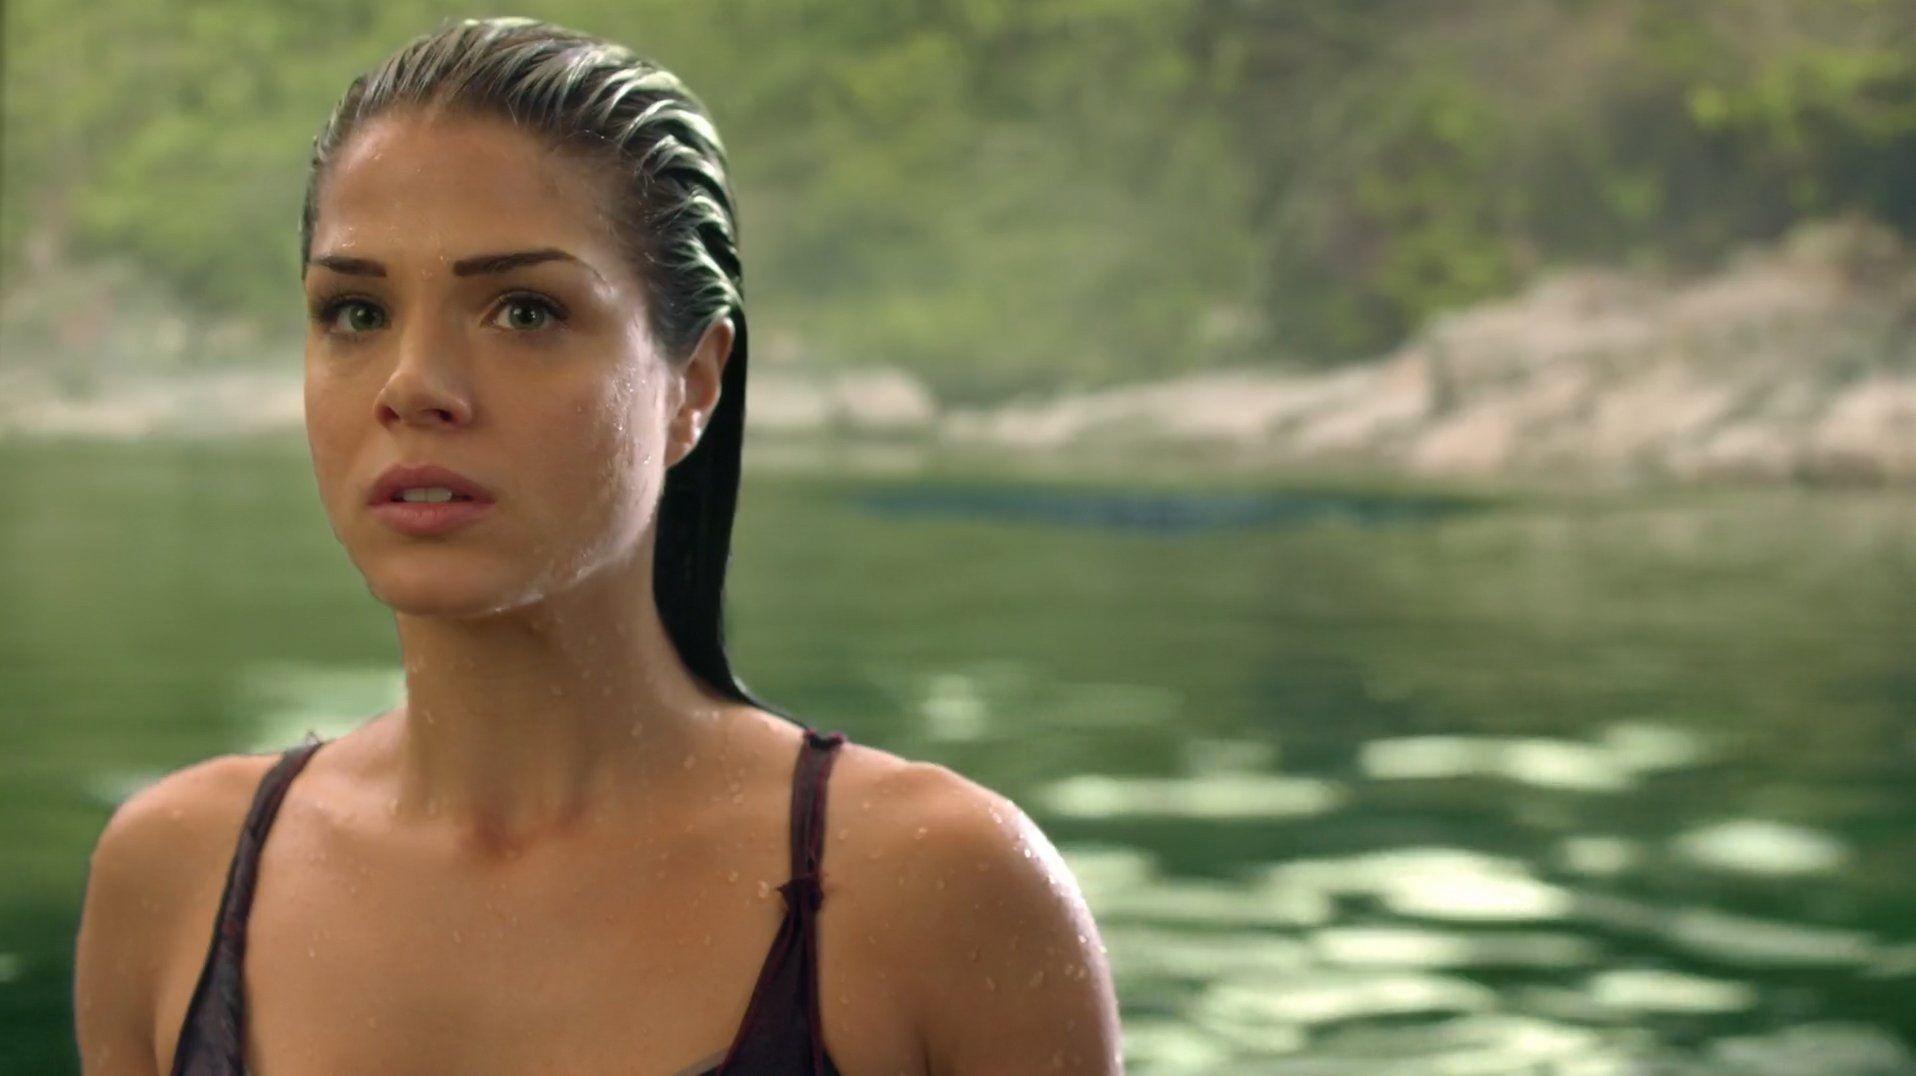 The 100 Screencaps. Marie avgeropoulos, The Show photo